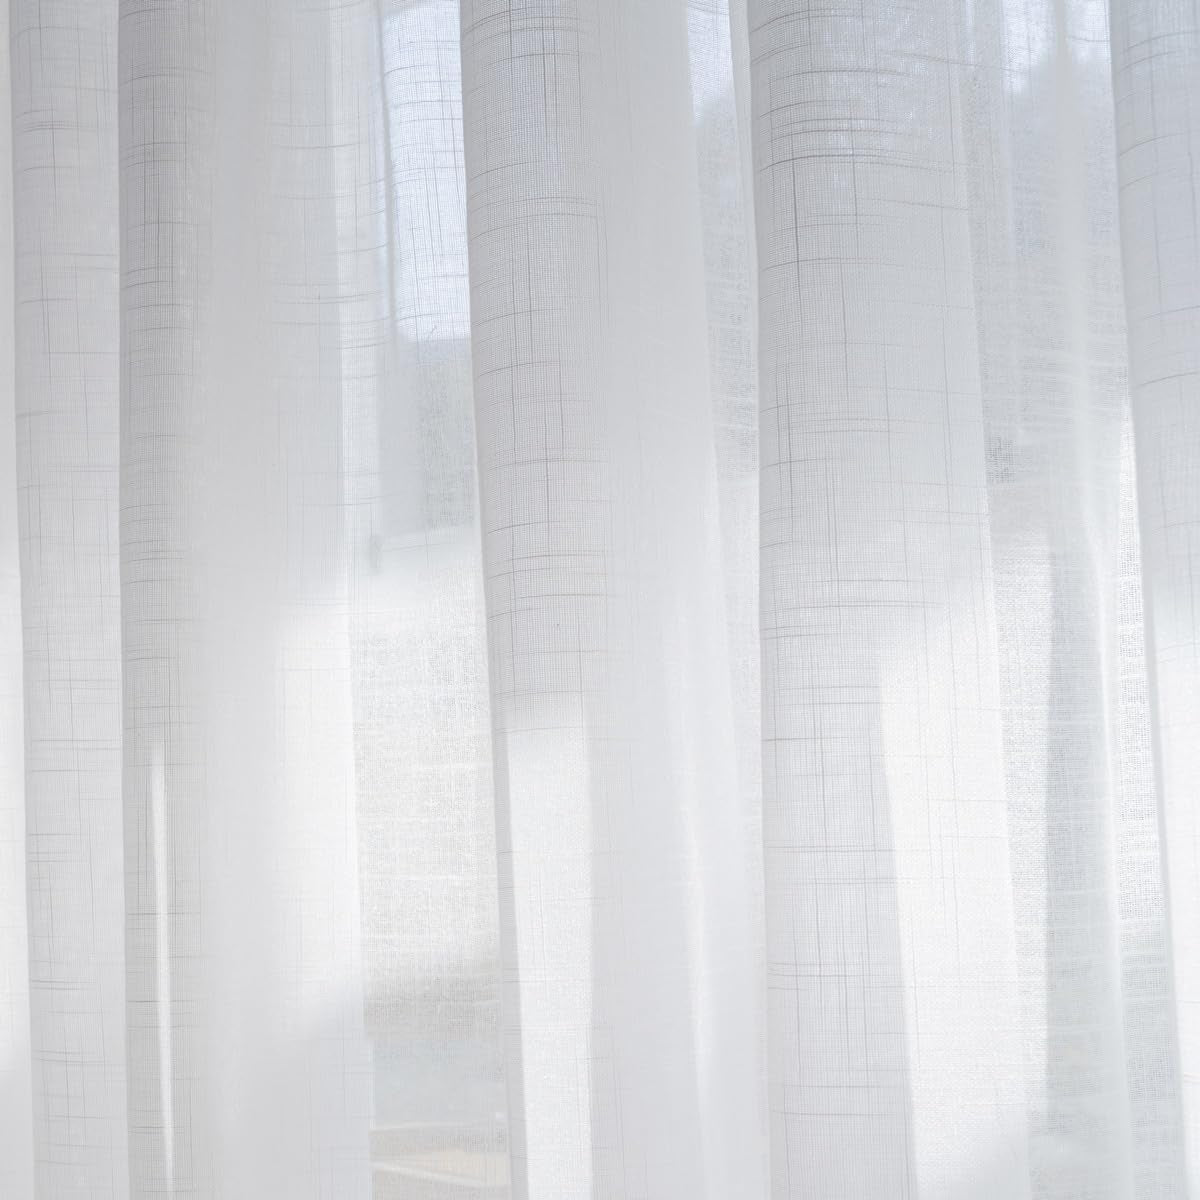 Lopacka Cream White Linen like Triple Pinch Pleated French Pleats 84 Length Sheer Curtains Window Treatment Voile Drapes Living Room Kitchen (Cream White, 42W X 84L (2 Panels))  SL   